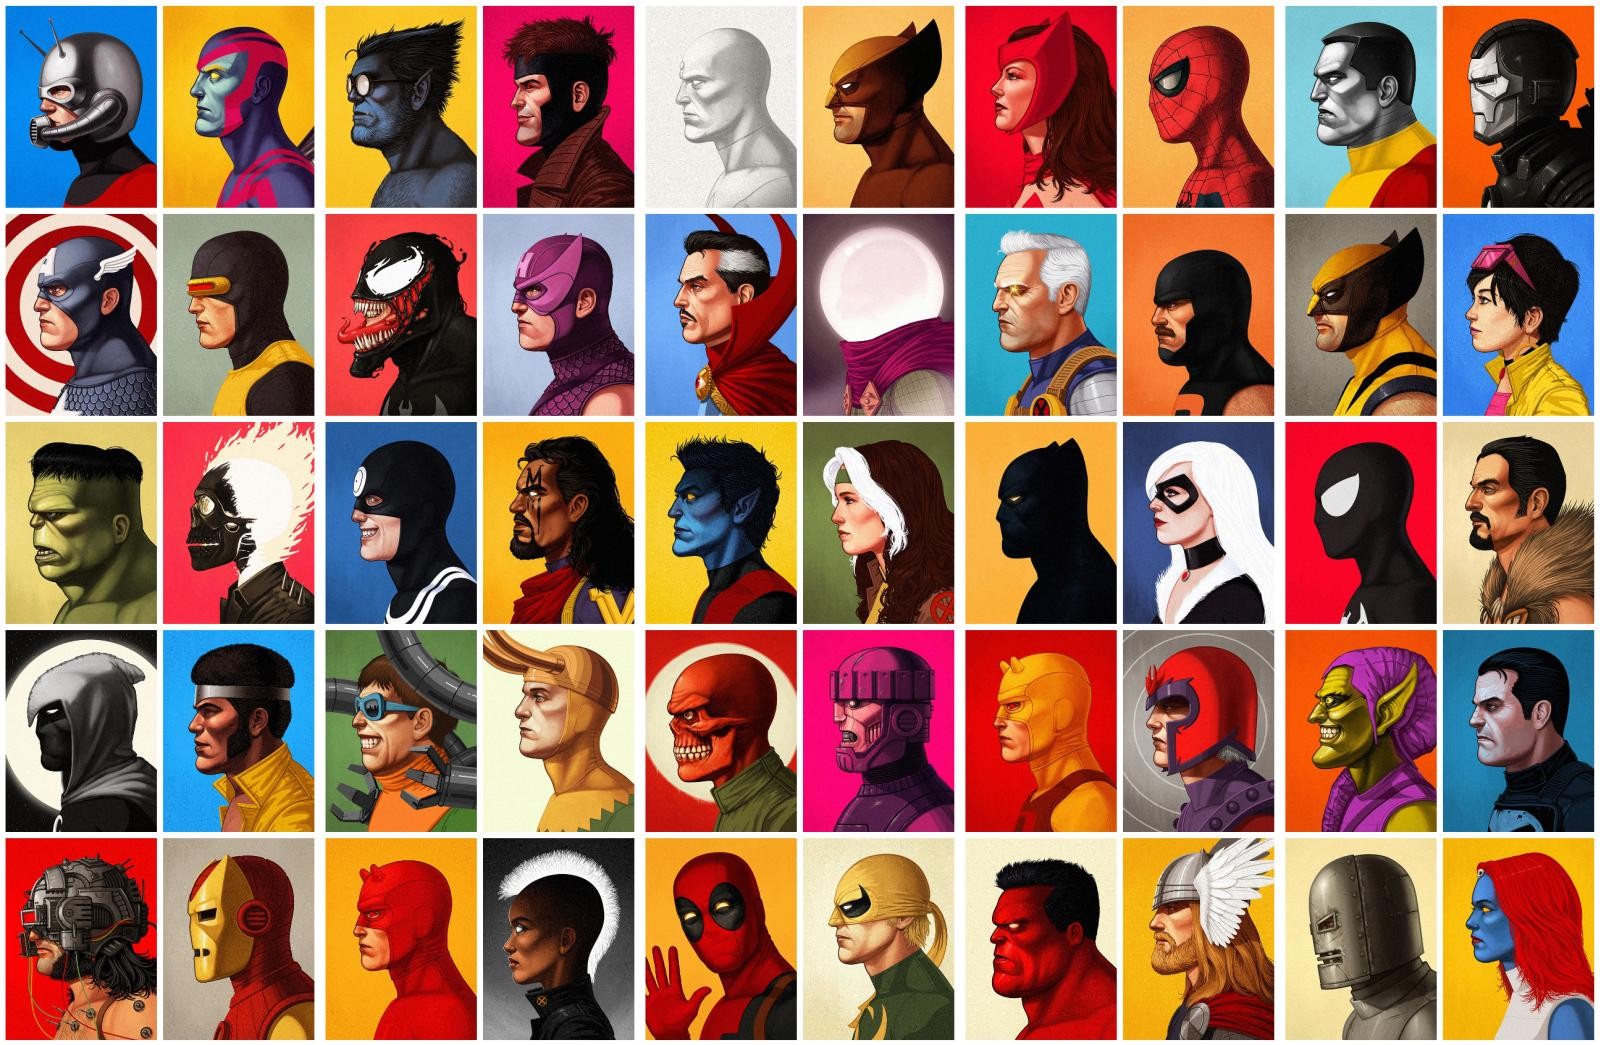 General 1600x1045 comics Marvel Comics collage Red Skull Deadpool red hulk Hulk Ant-Man Wolverine Spider-Man Captain America Venom Doctor Strange Thor comic art Loki Mysterio (Character) Hawkeye Scarlet Witch Black Panther Moon Knight Colossus Rogue (X-men) Storm (character) Green Goblin Doctor octopus The Punisher Iron Fist Beast (character) digital art